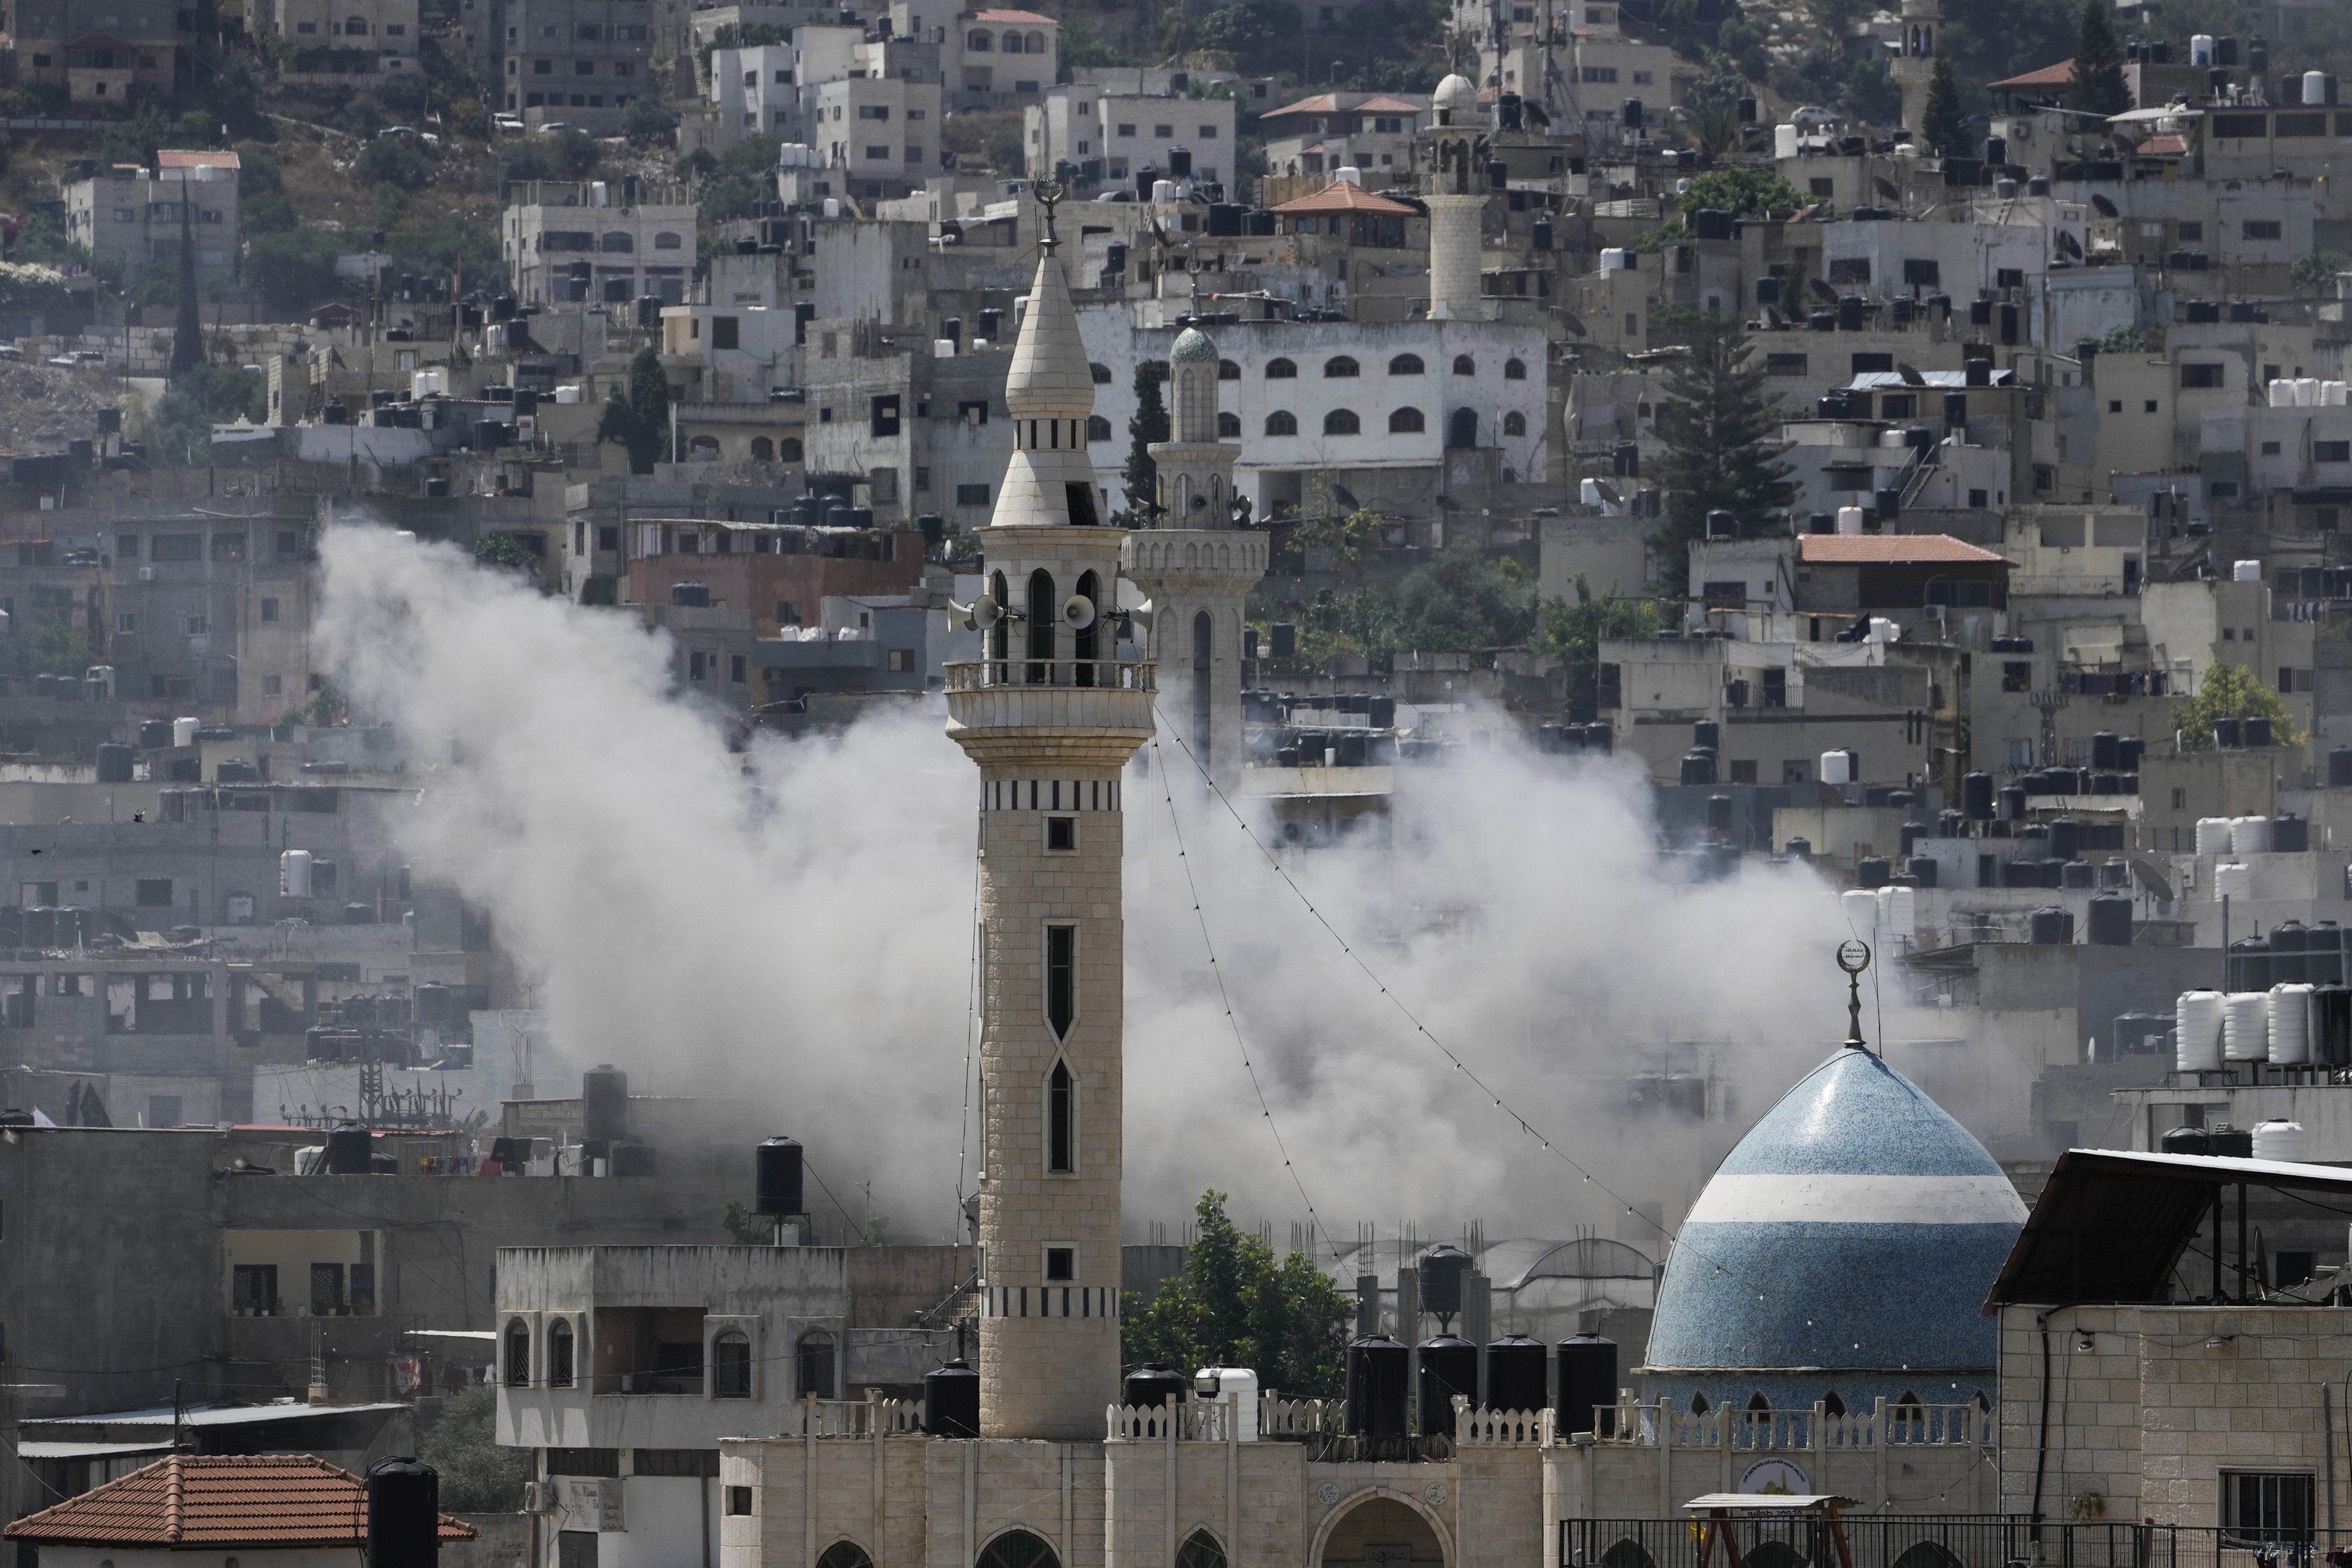 Smoke rises during an Israeli military operation in Jenin, in the Israeli-occupied West Bank. Photo: Associated Press
